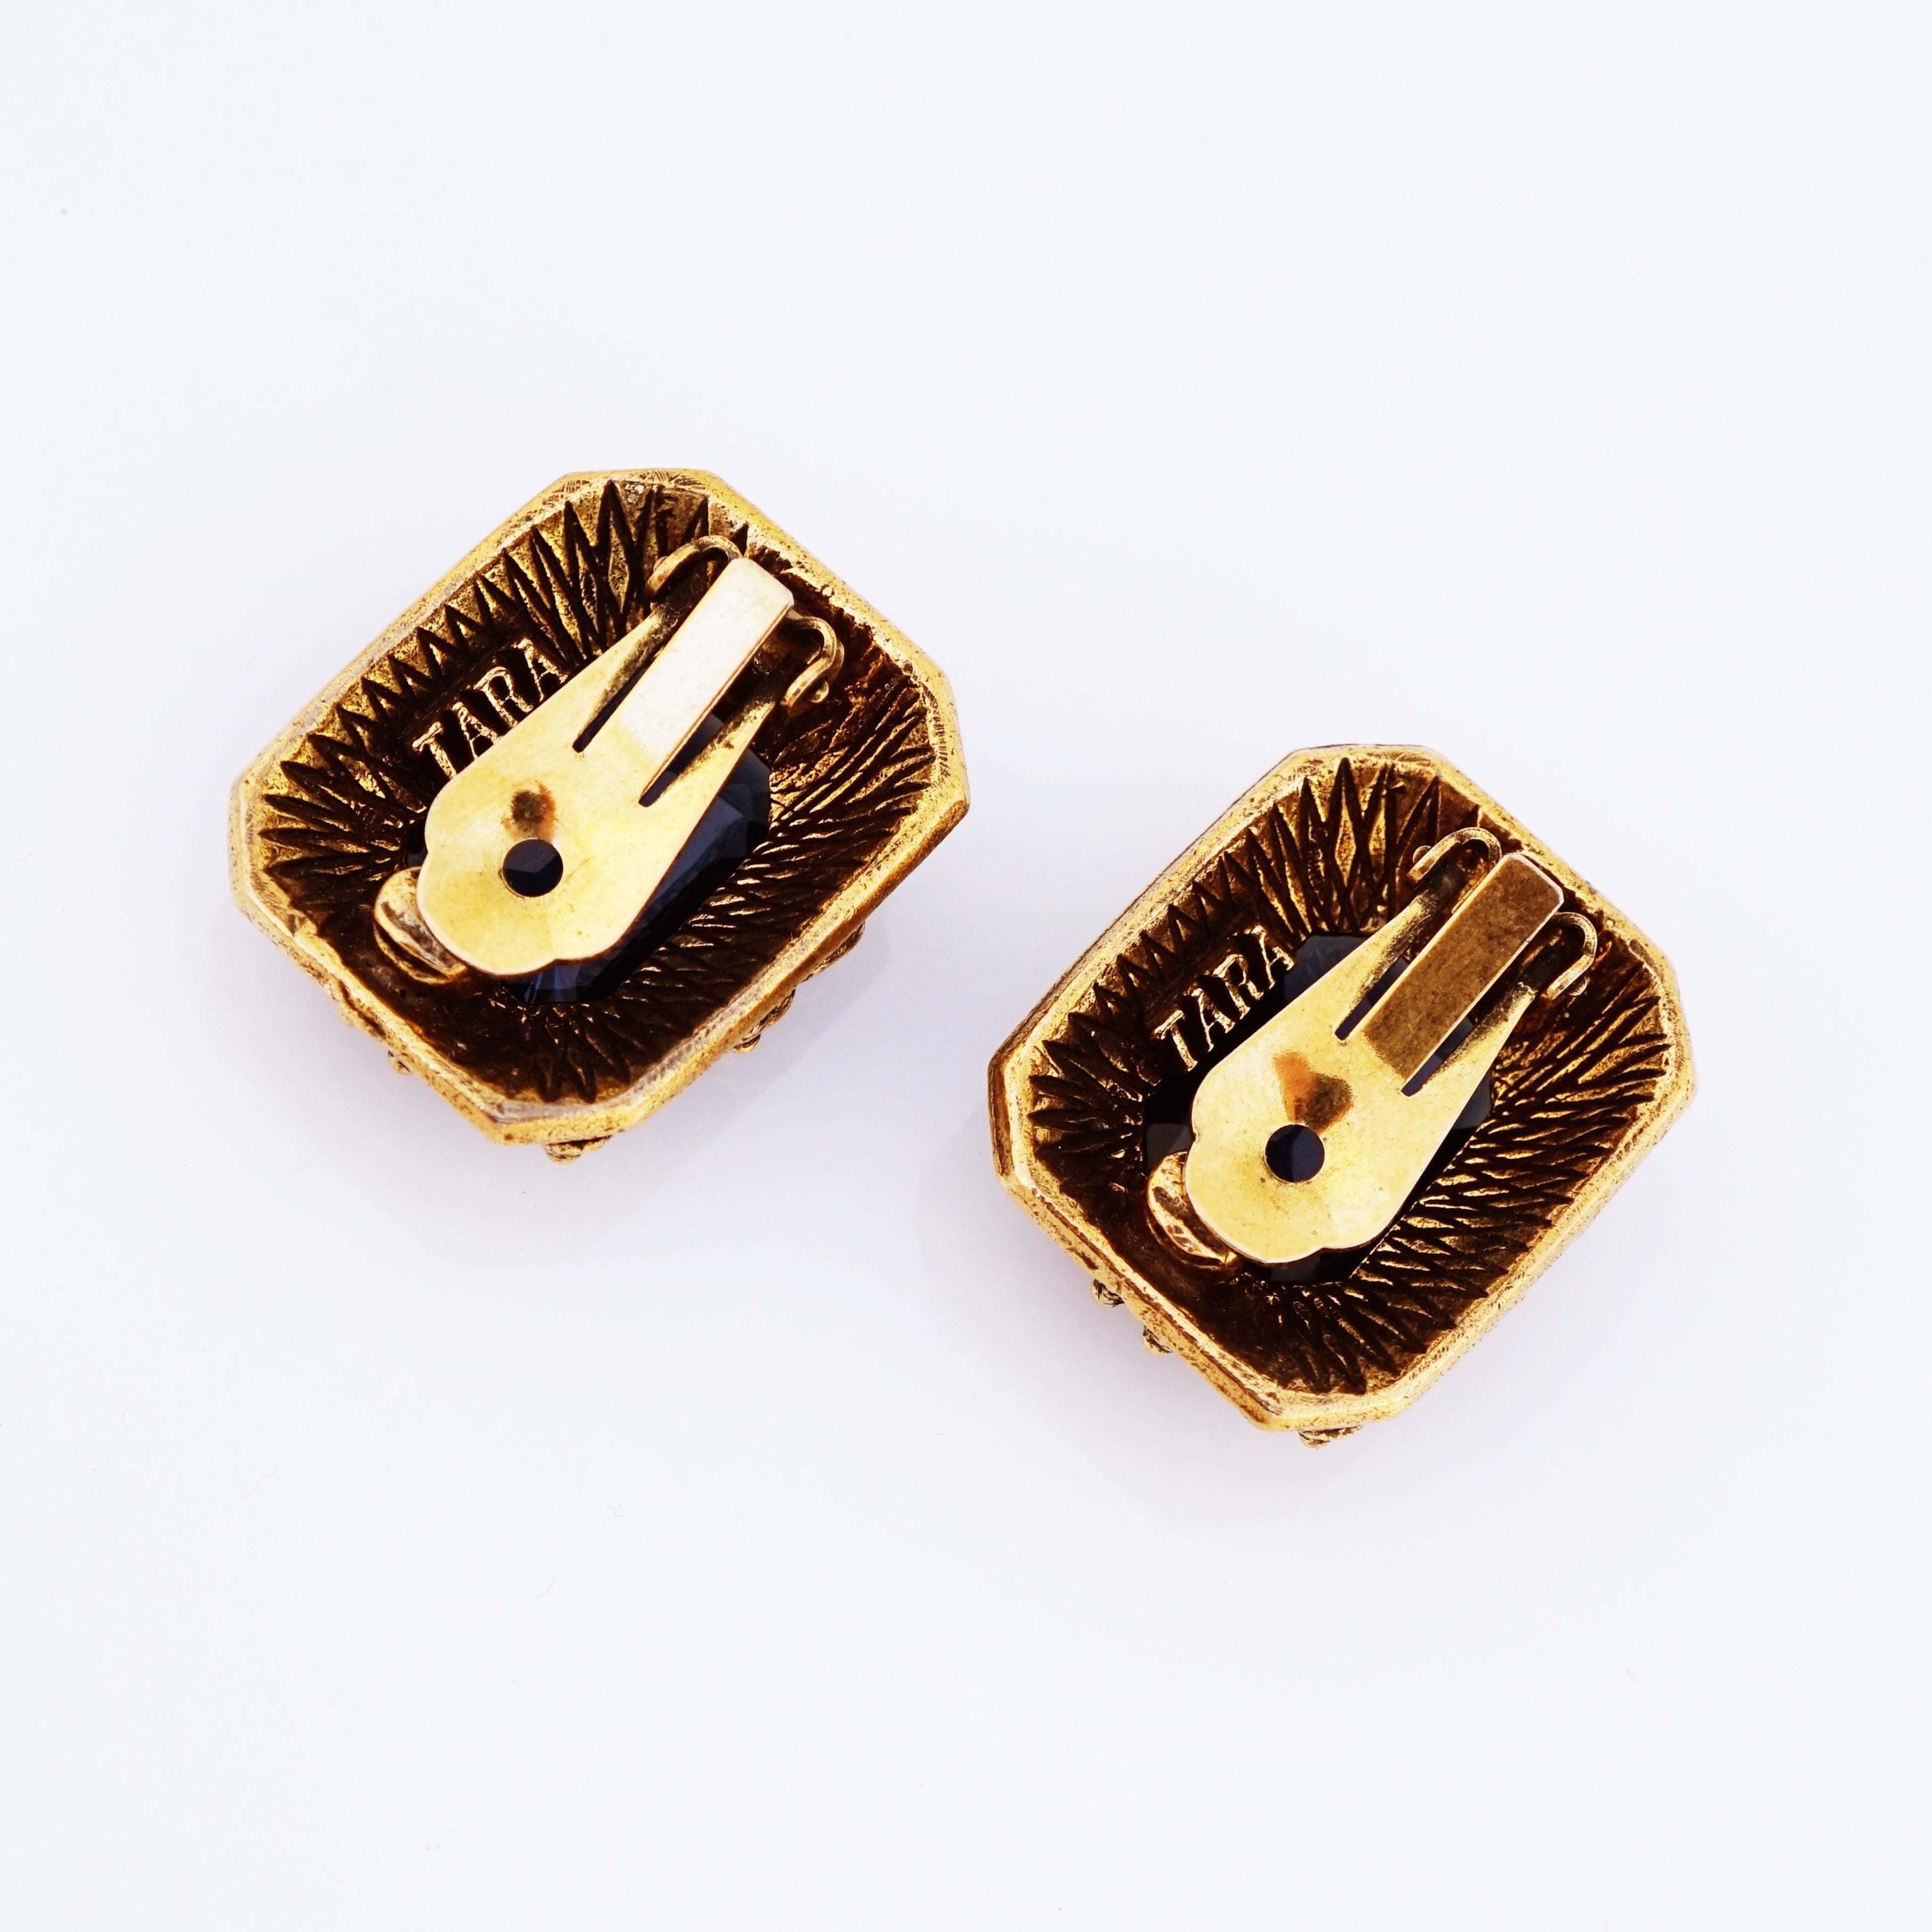 Modern Antique Gold Sapphire Crystal Statement Earrings By Tara Fifth Avenue, 1970s